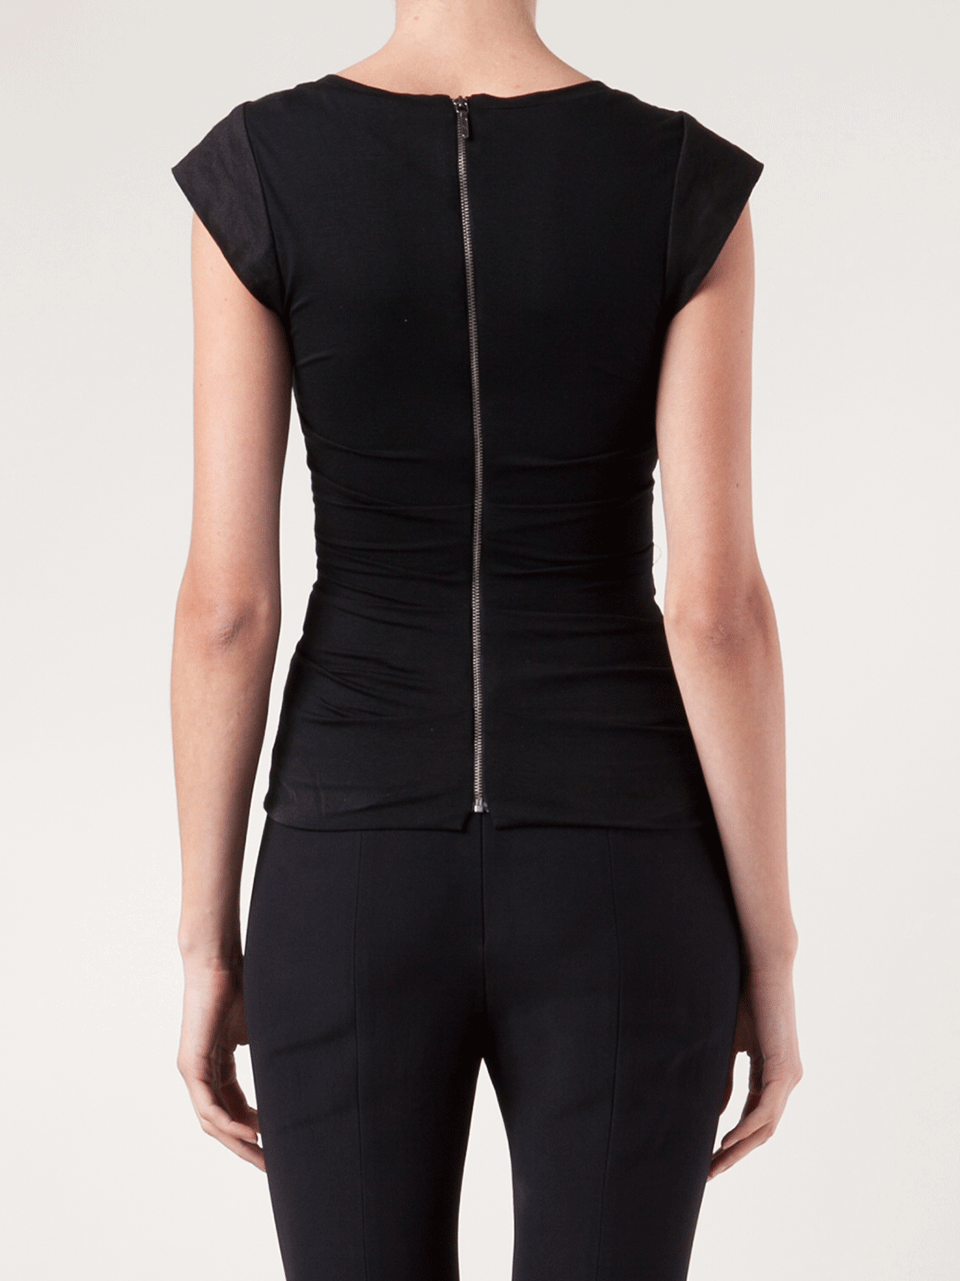 V-Neck Ruch Top With Back Zip CLOTHINGTOPMISC NICOLE MILLER   